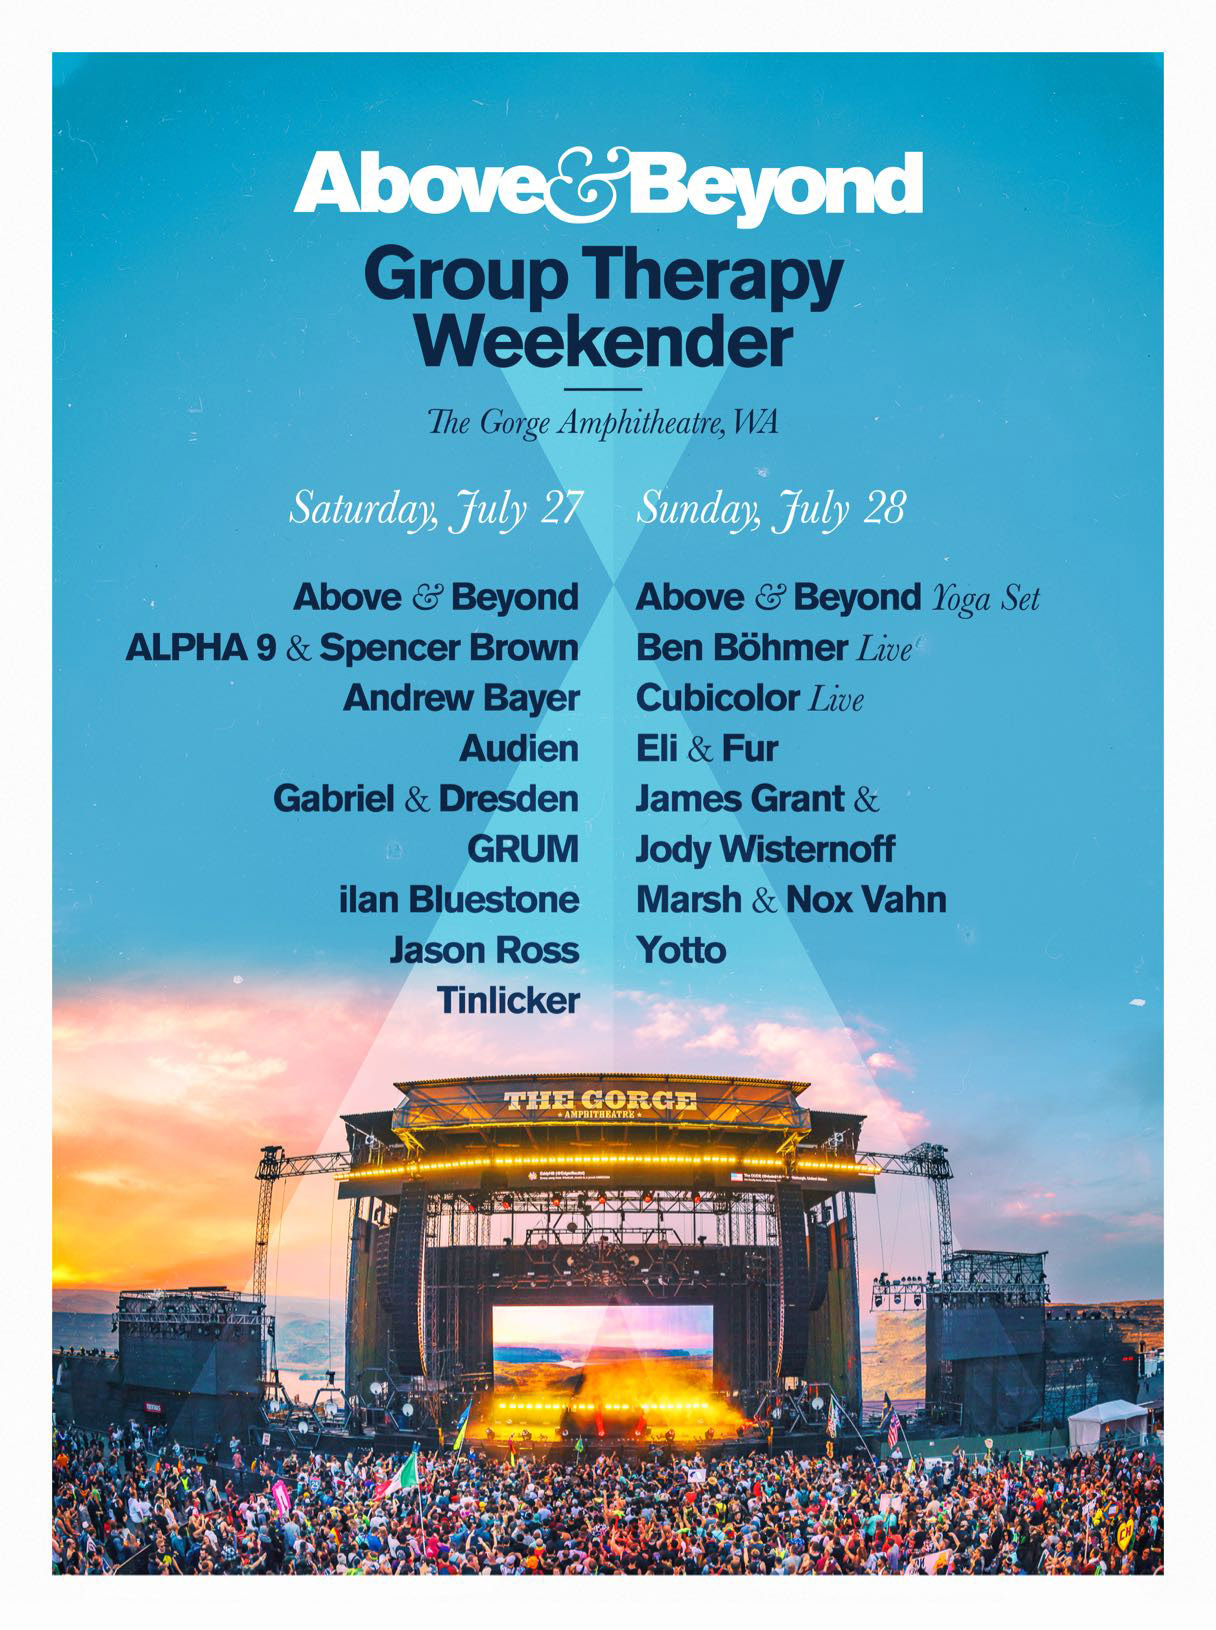 Group Therapy Weekender